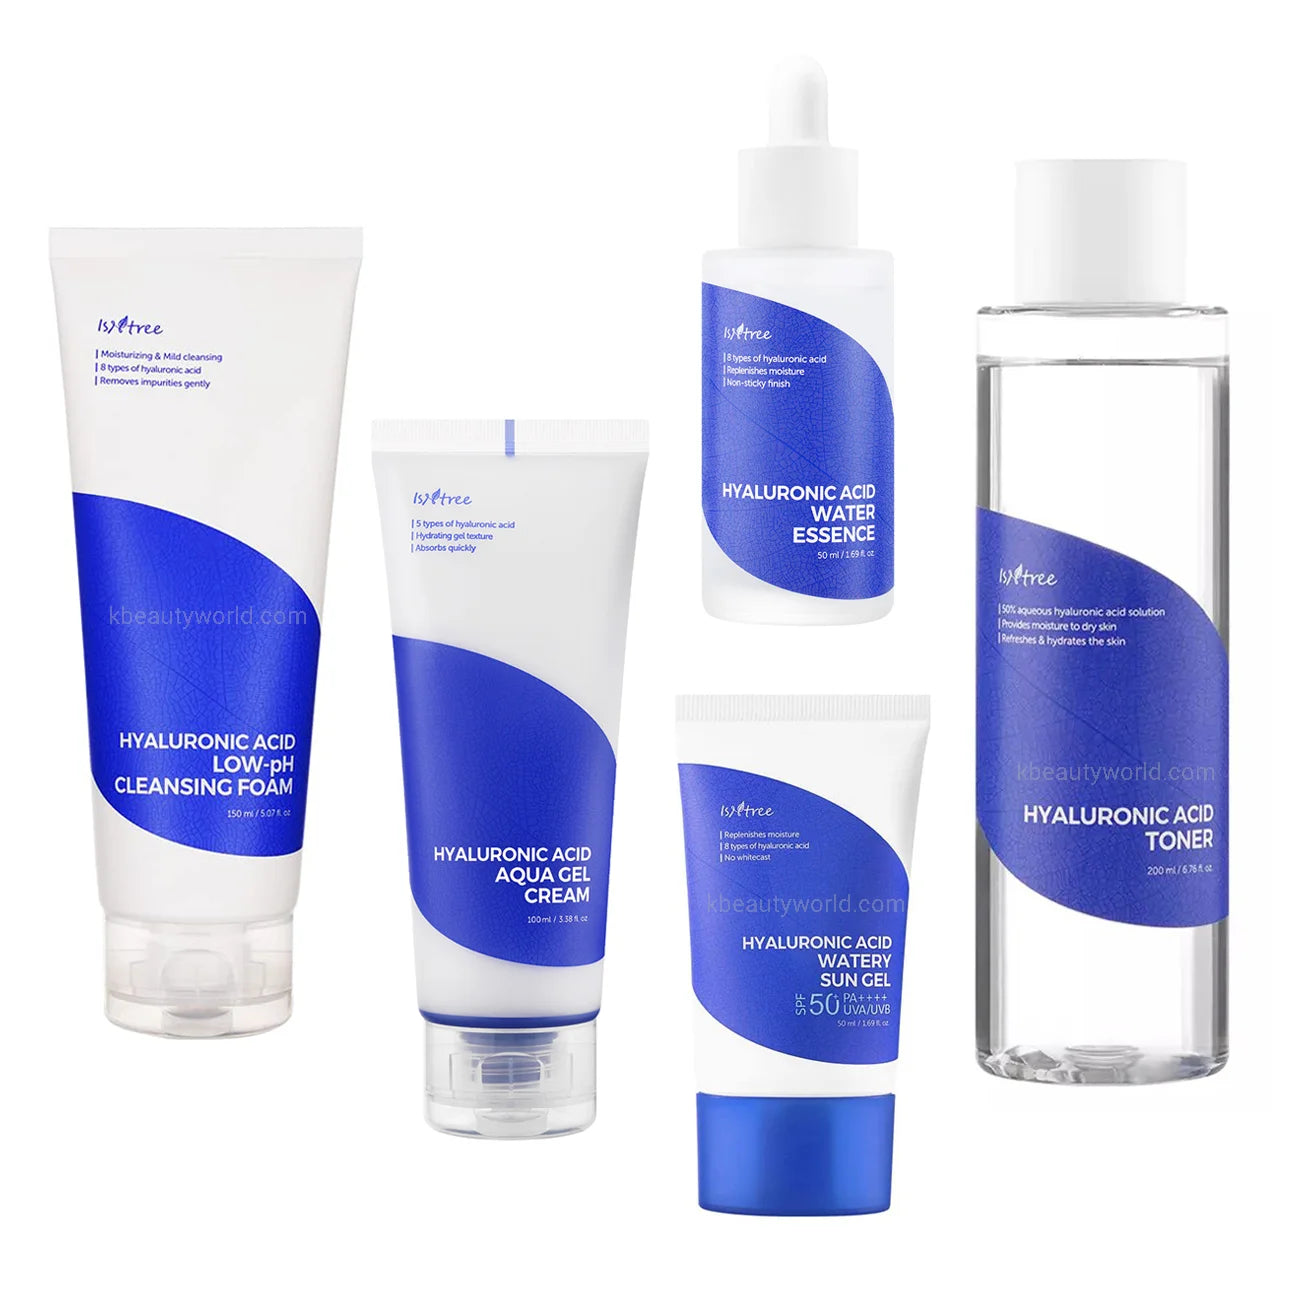 Isntree Hyaluronic Acid Refreshing Set best hydrating soothing non-comedogenic Korean skin care routine set for combination oily sensitive acne prone dehydrated skin K Beauty World